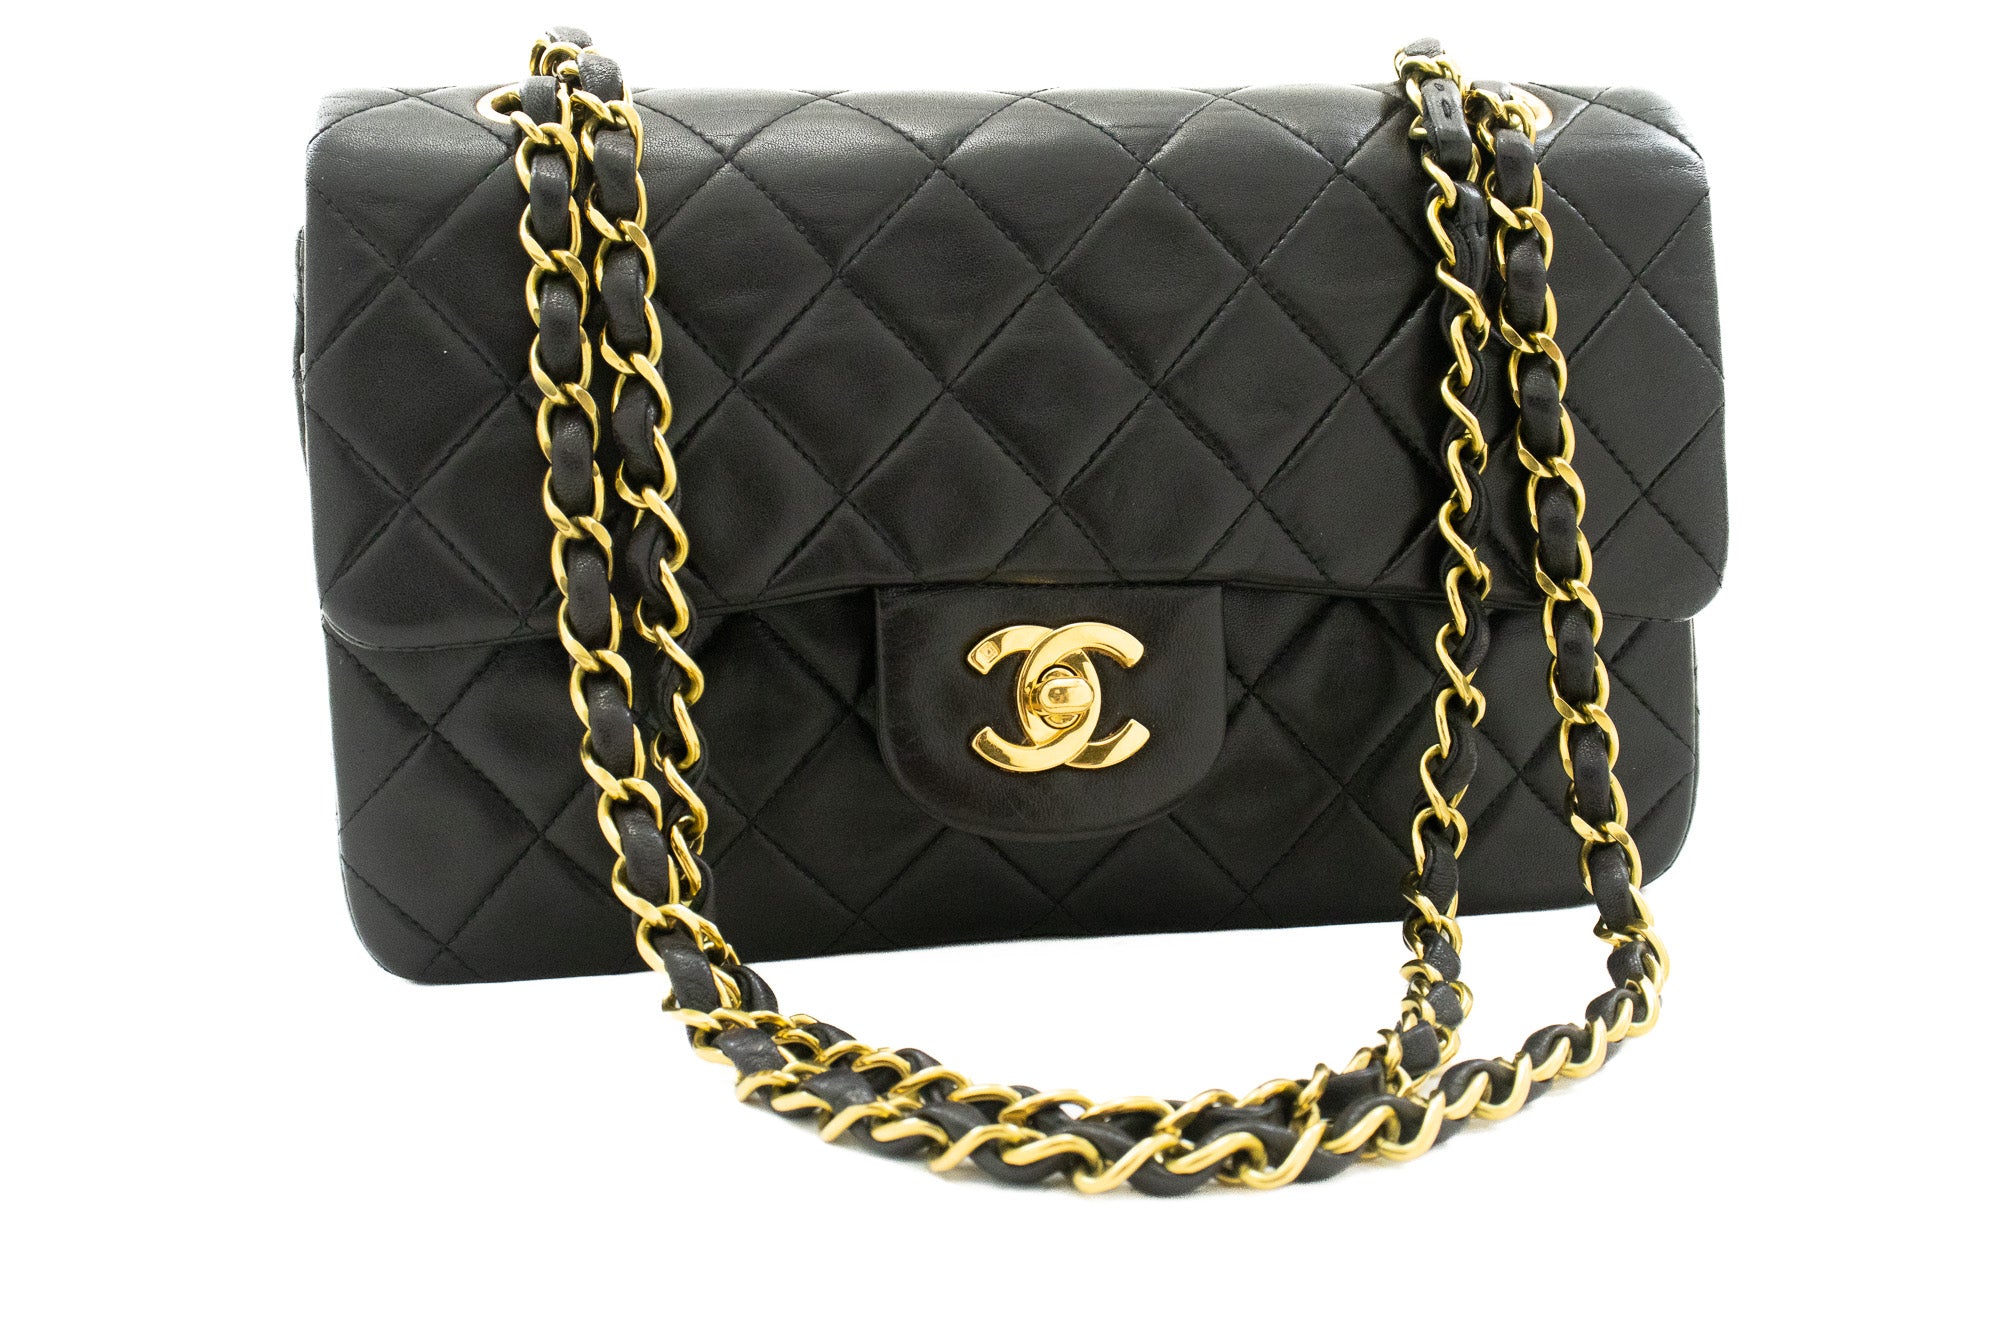 Chanel Classic Medium Double Flap in Black Caviar Leather with Shiny Gold  Hardware - SOLD